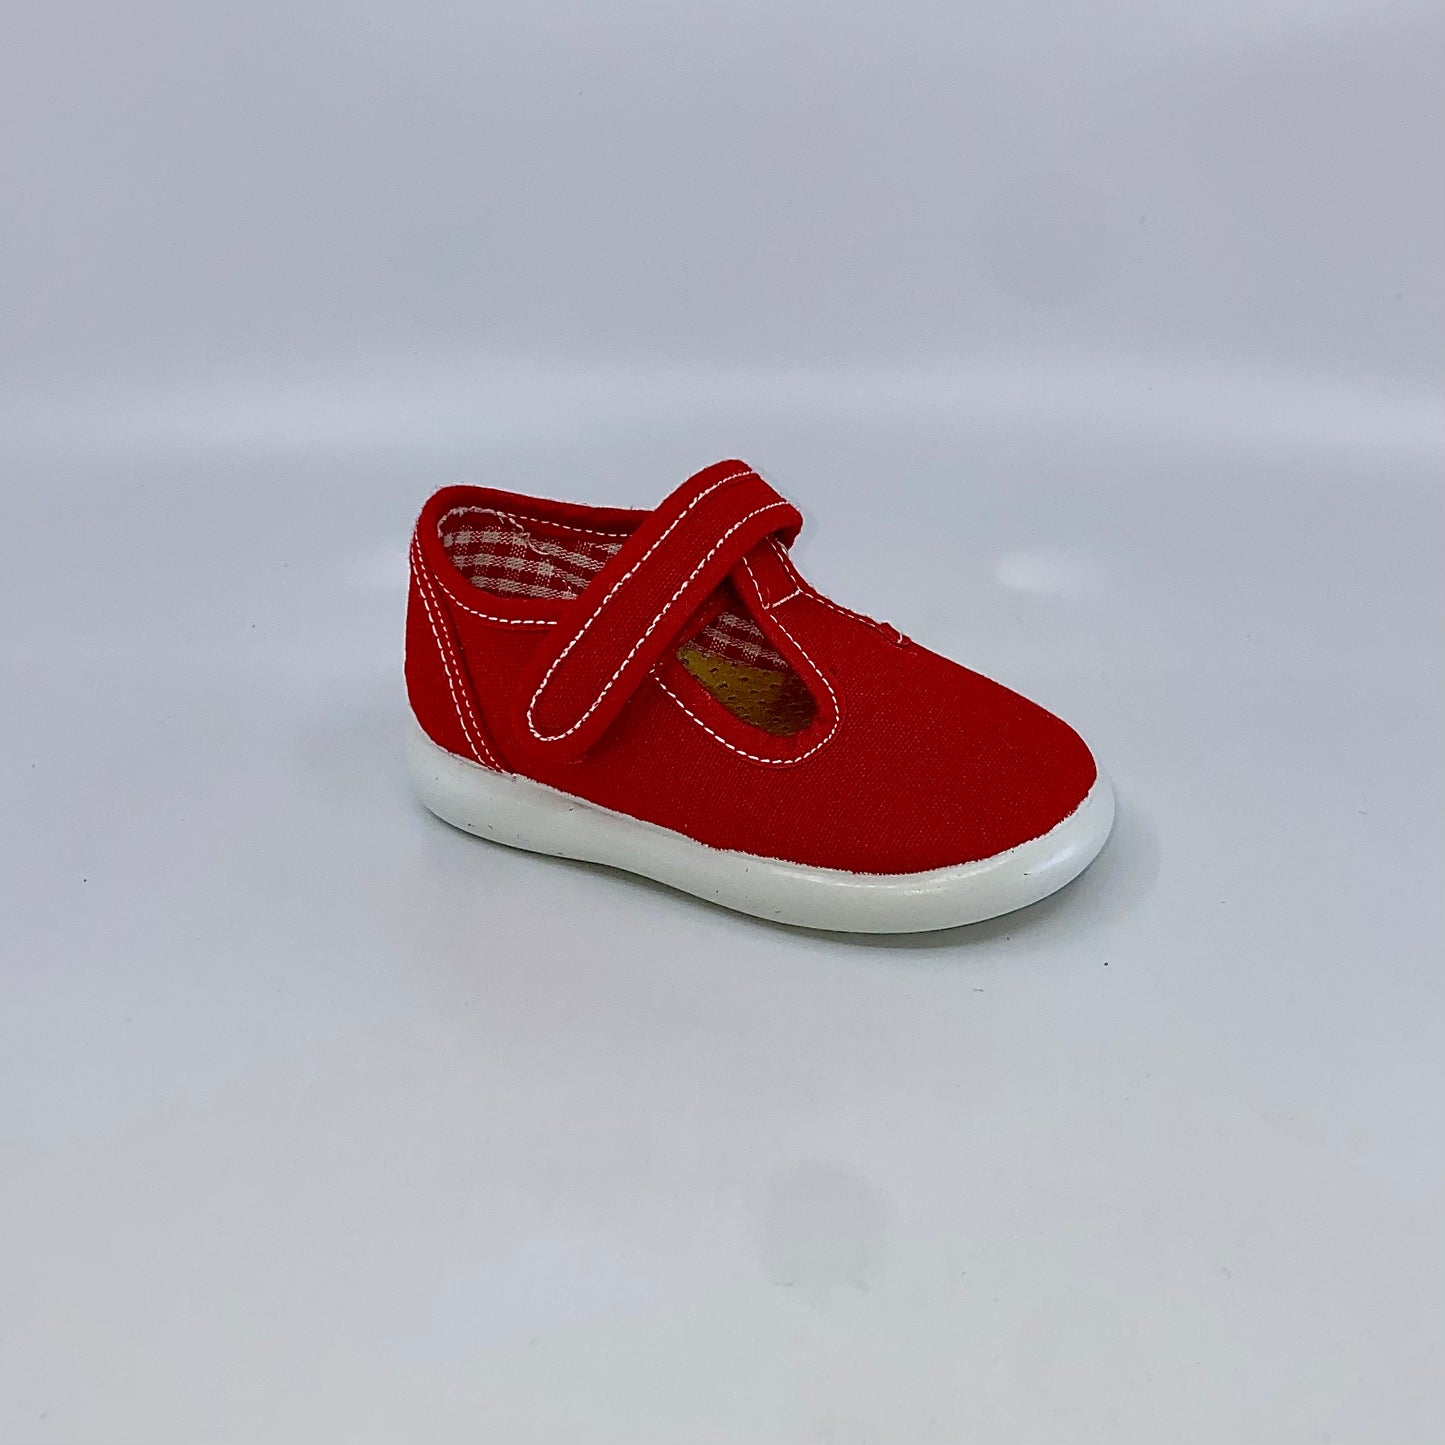 Canvas -Lightweight and comfy T strap in red canvas  upper - velcro strap -Textile lining and padded insole. - Smooth traction rubber sole -Rounded toe -Made in Spain